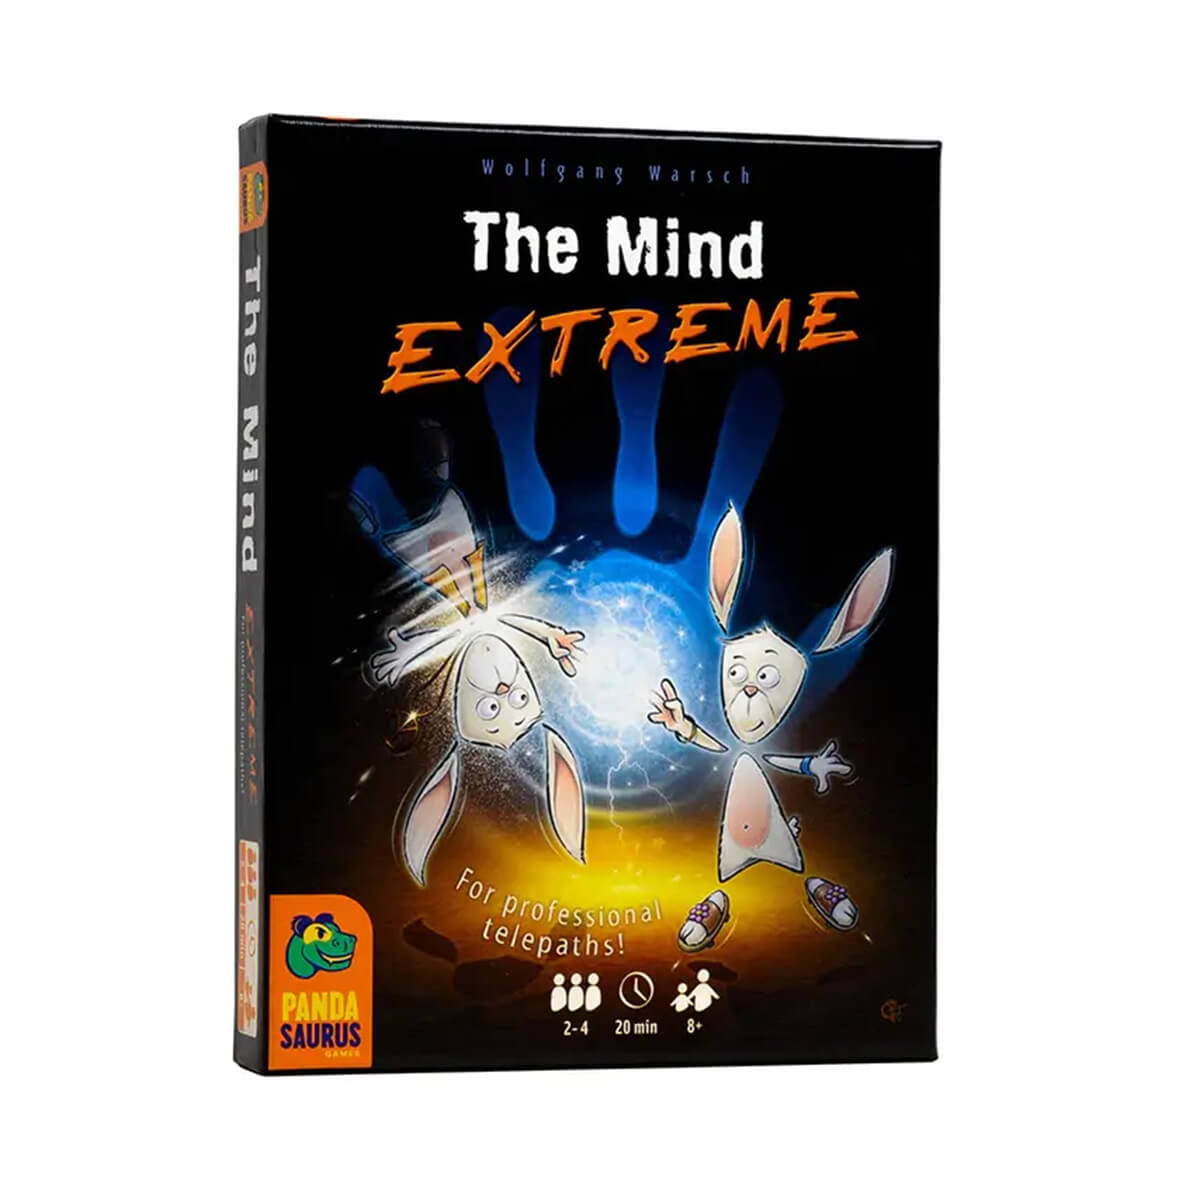 The Mind Extreme.